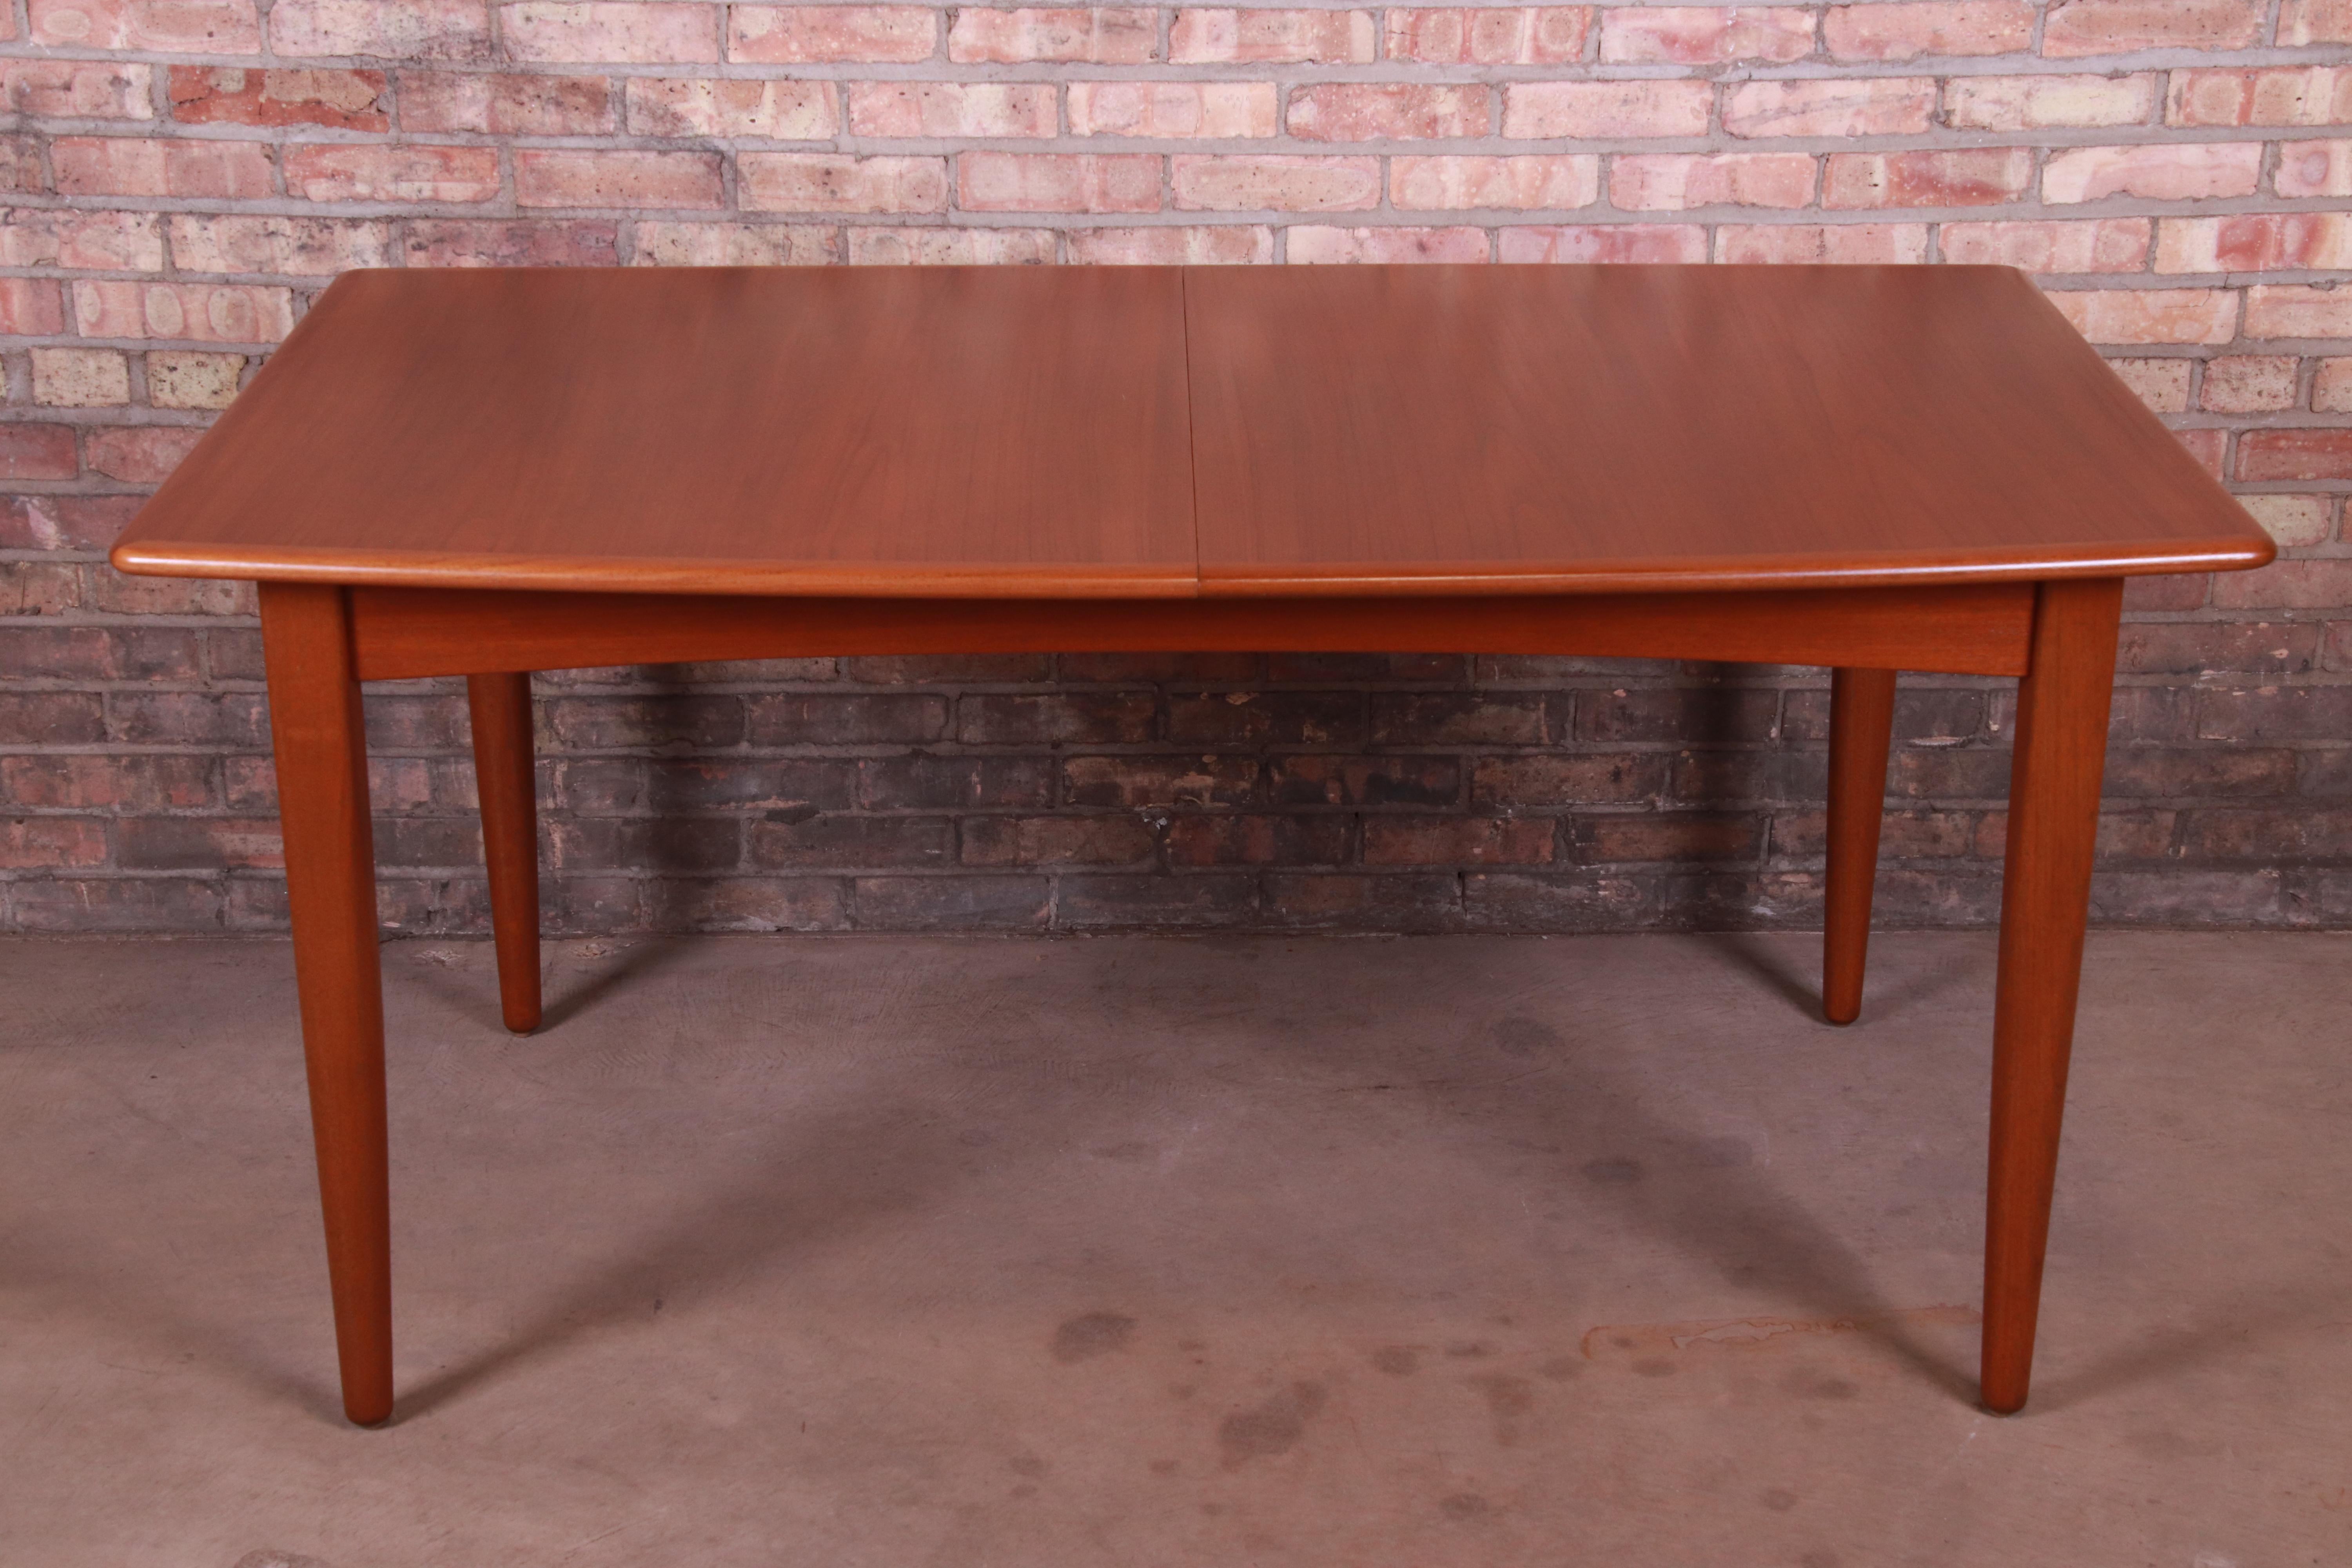 Mid-20th Century Falster Danish Modern Teak Boat-Shaped Extension Dining Table, Newly Restored